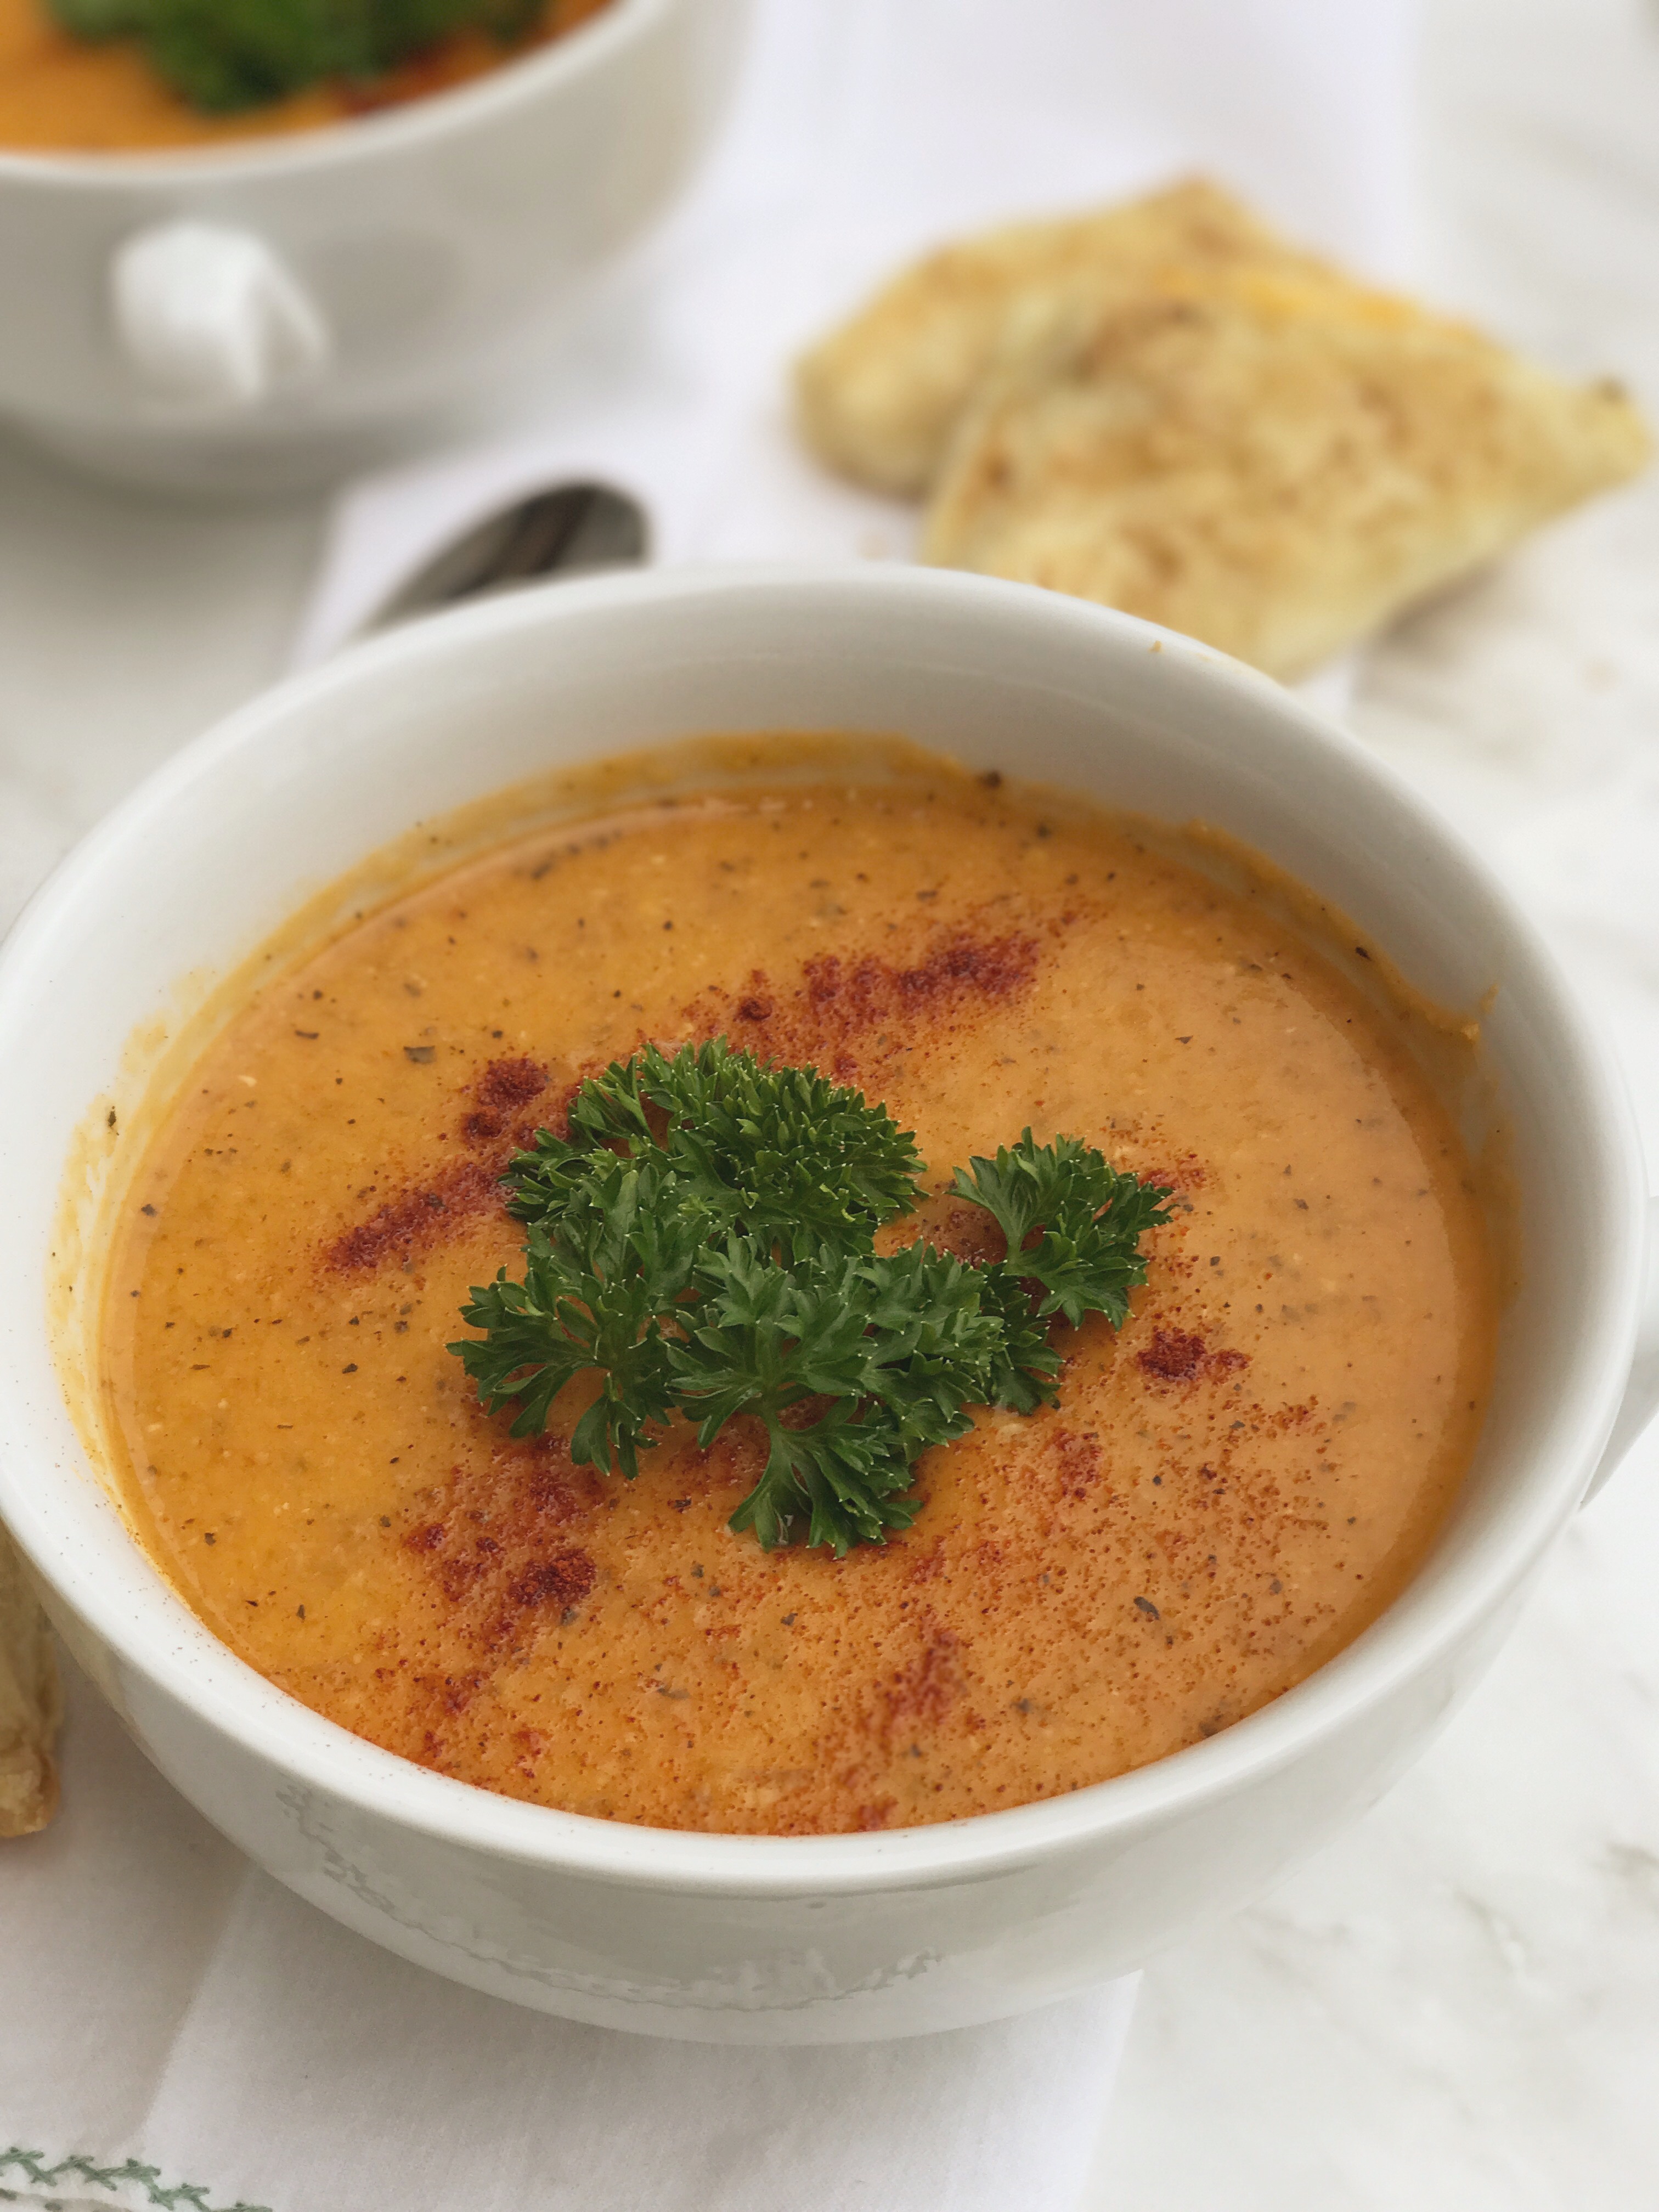 easy Red Lentil Soup recipe known as Tlavhe